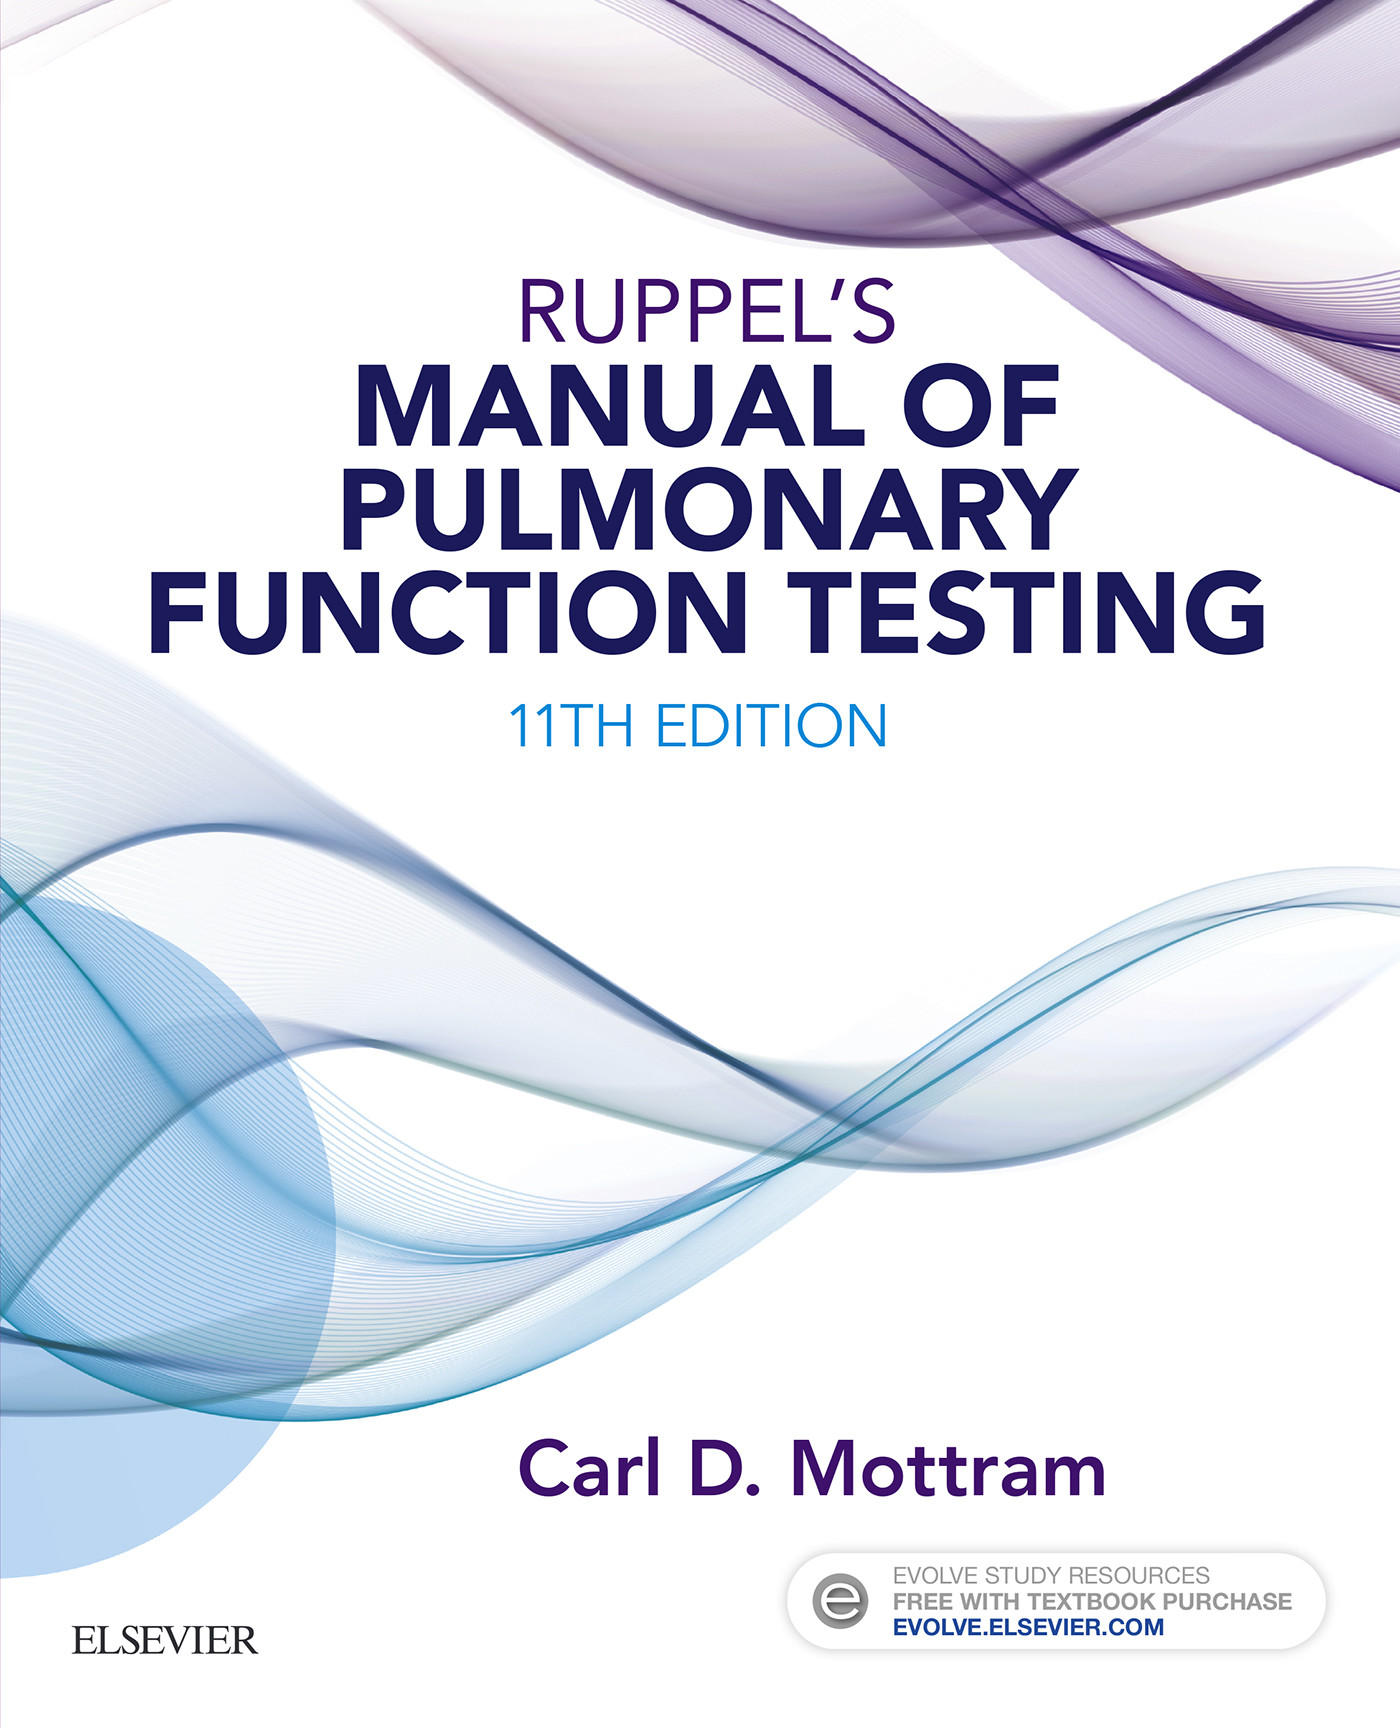 Cover Ruppel's Manual of Pulmonary Function Testing